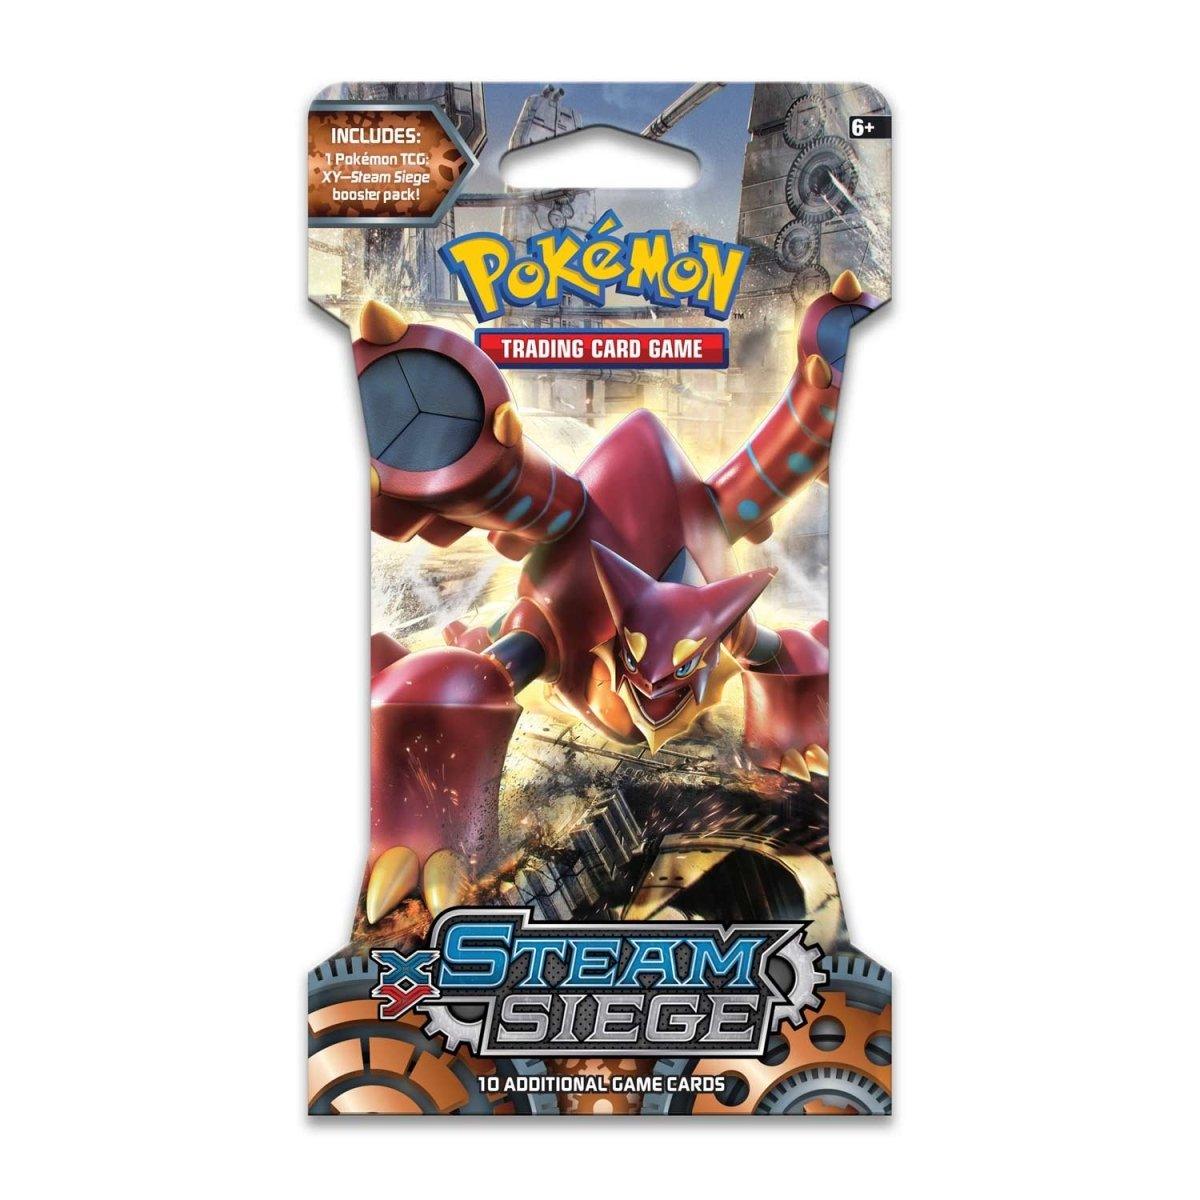 Pokemon Sleeved Booster Pack (10 Cards) - XY - Steam Siege - Hobby Champion Inc